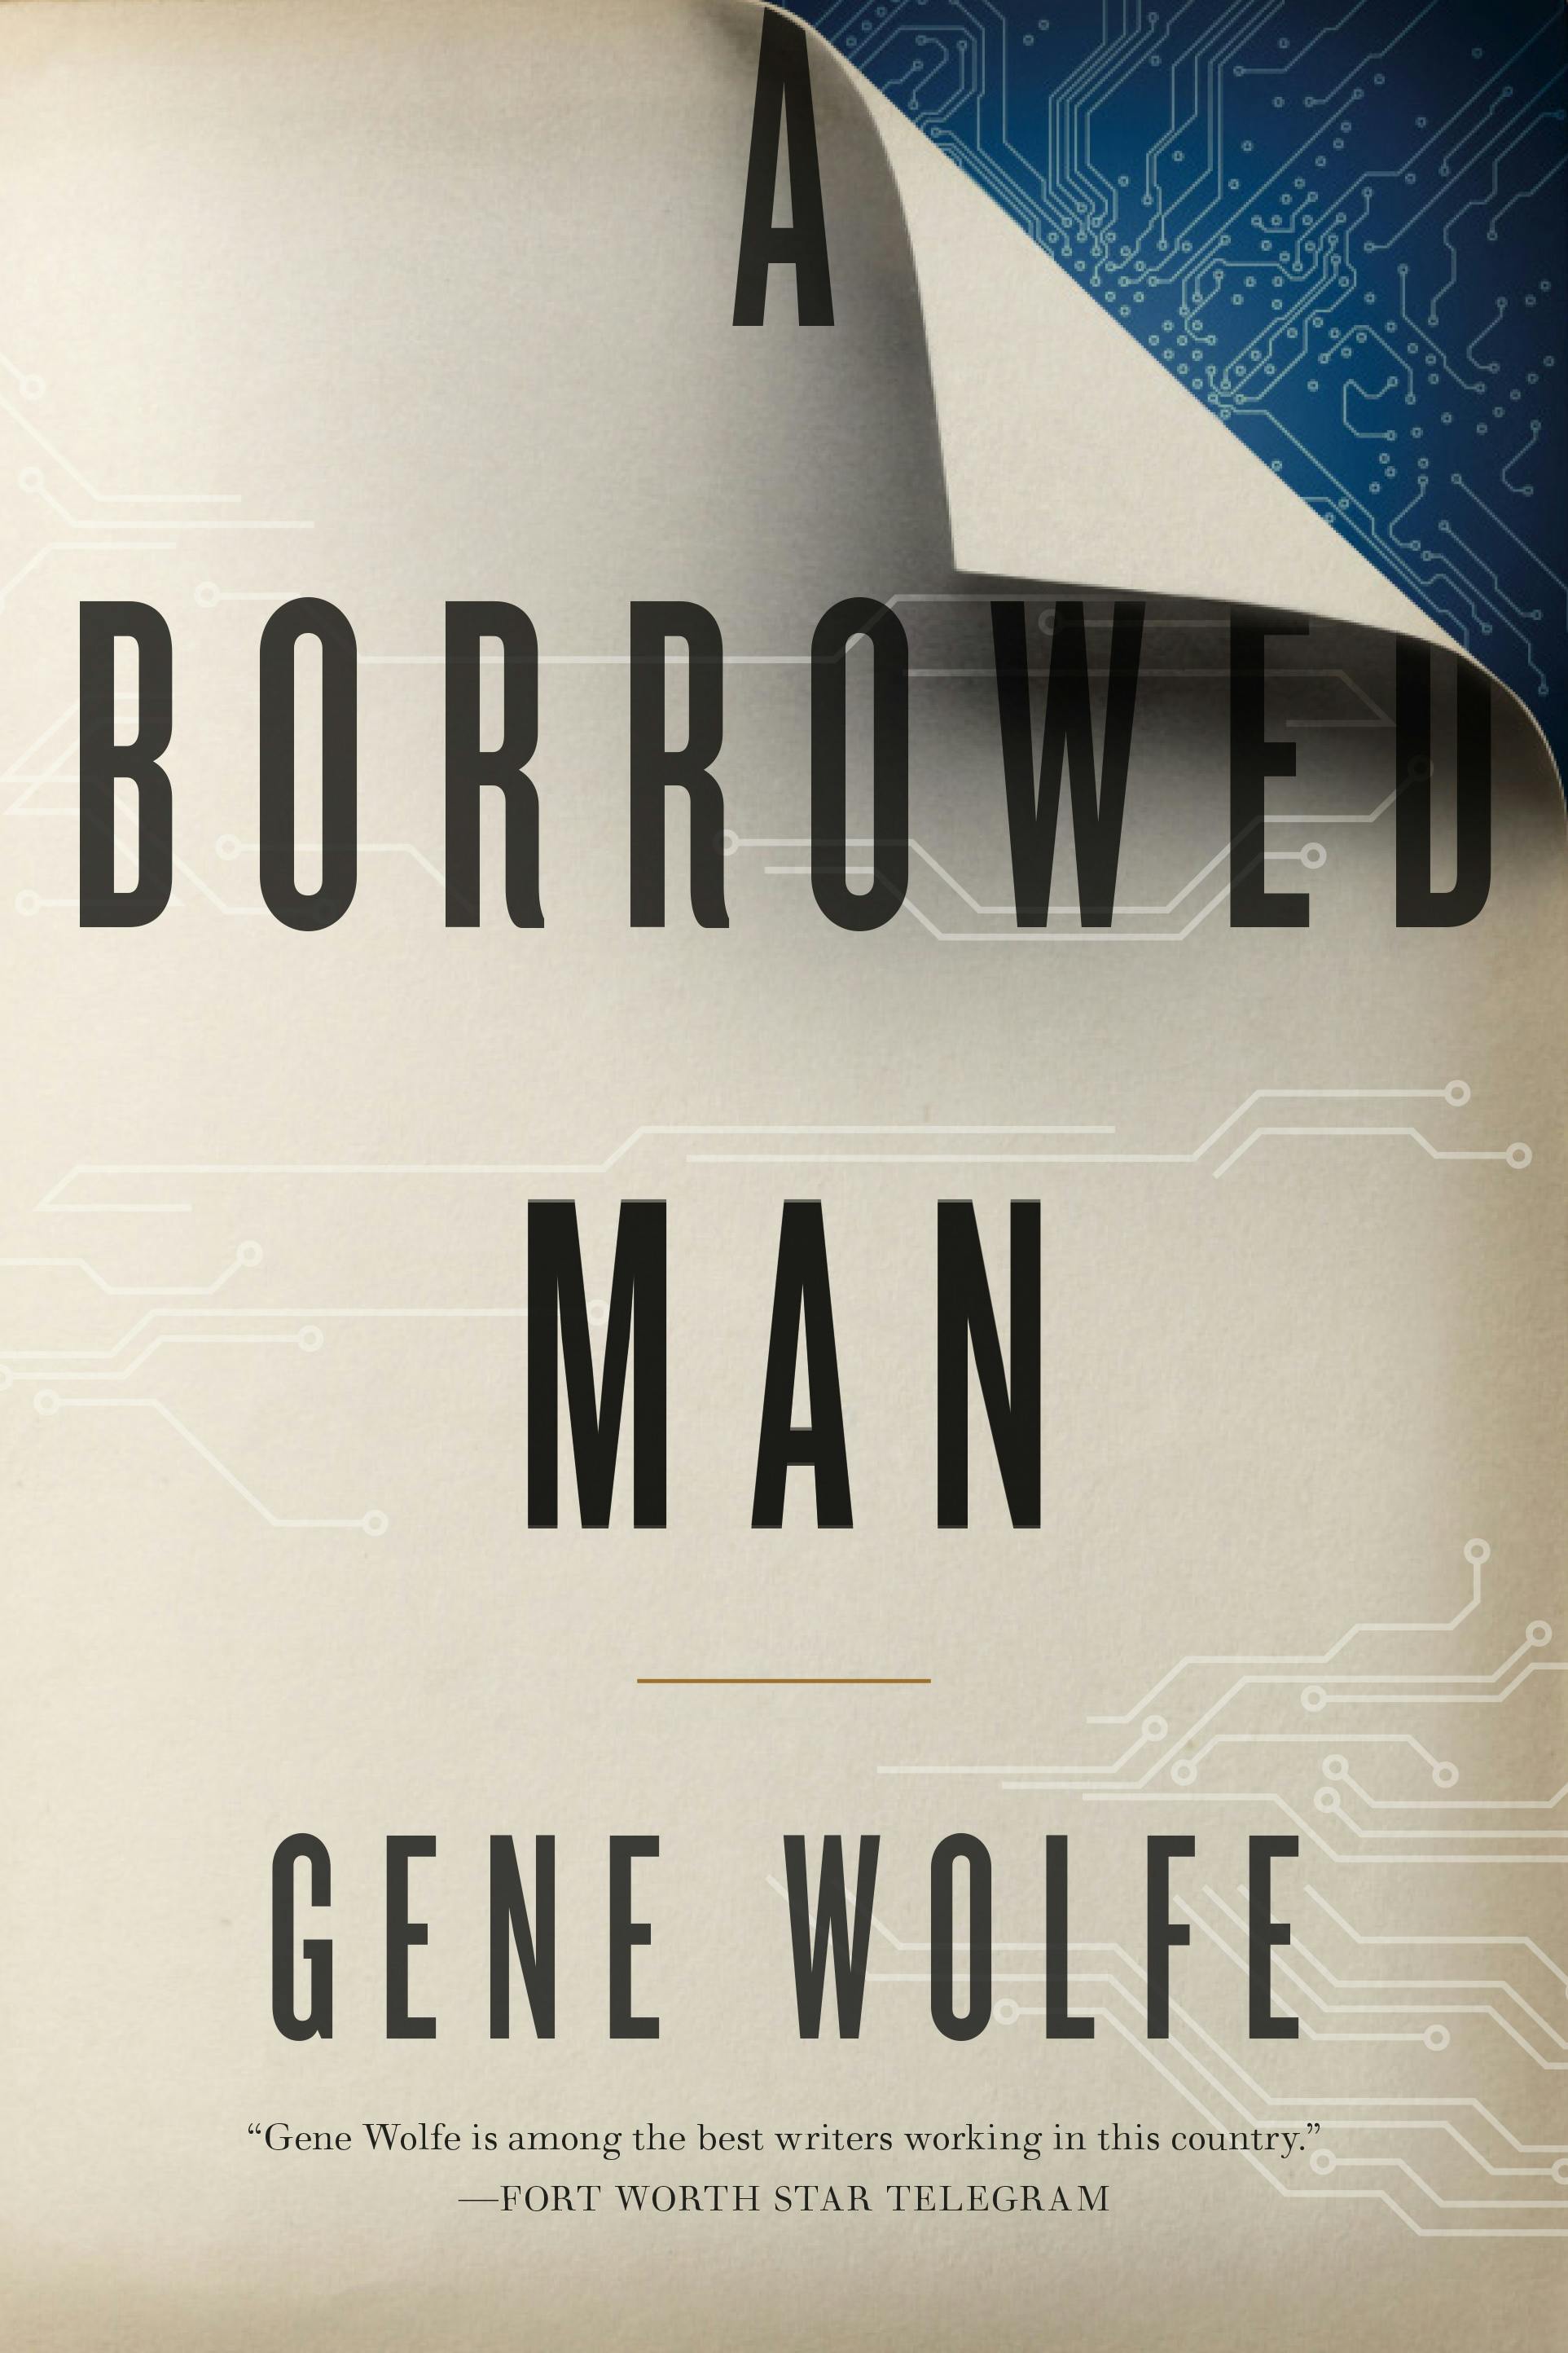 Cover for the book titled as: A Borrowed Man